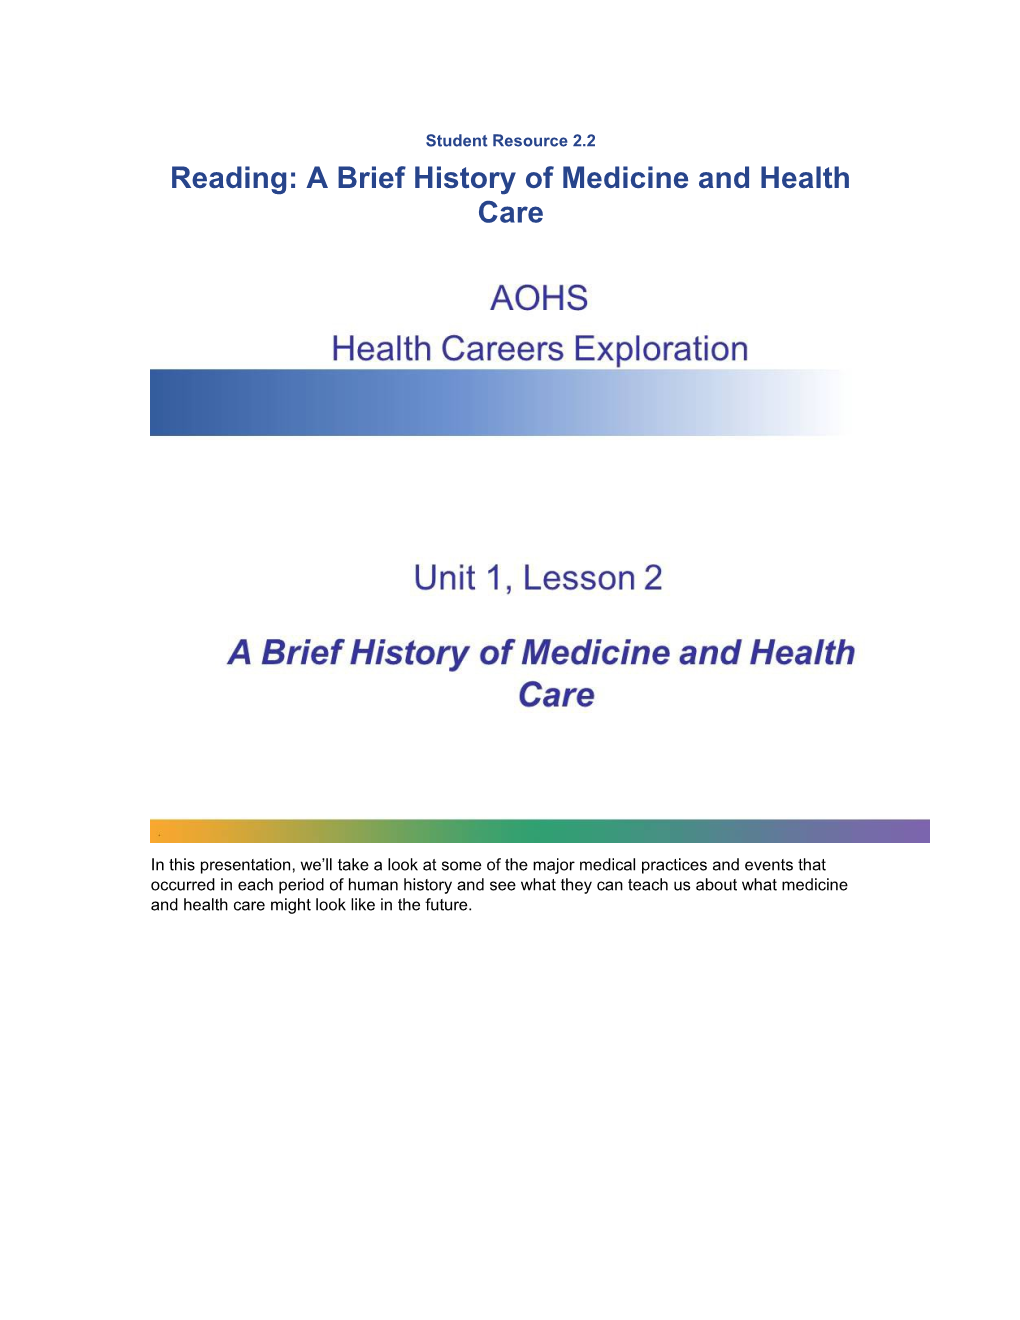 Reading: a Brief History of Medicine and Health Care